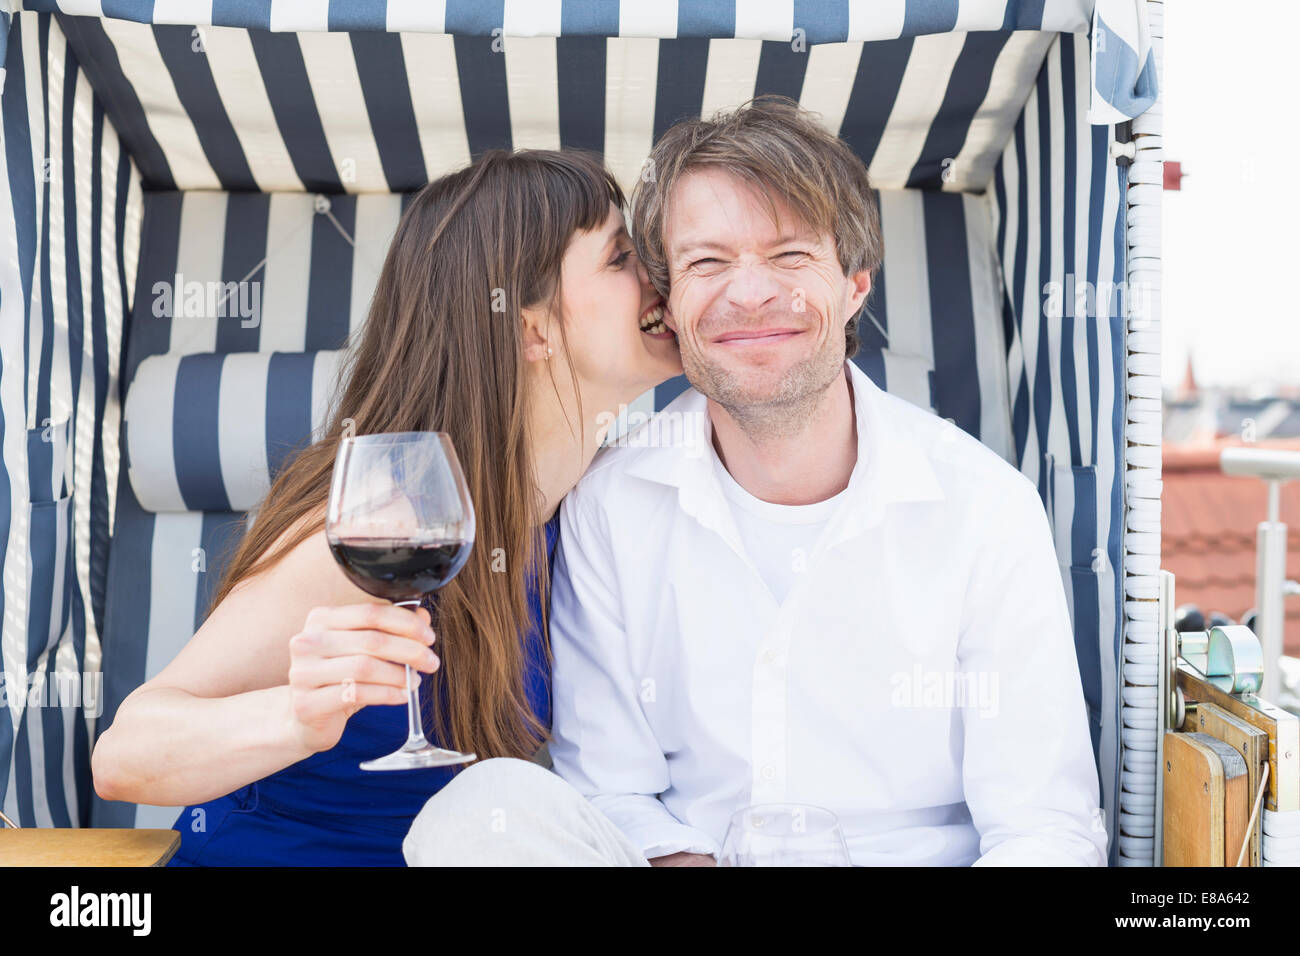 Couple having vine in roofed wicker beach chair, smiling Stock Photo